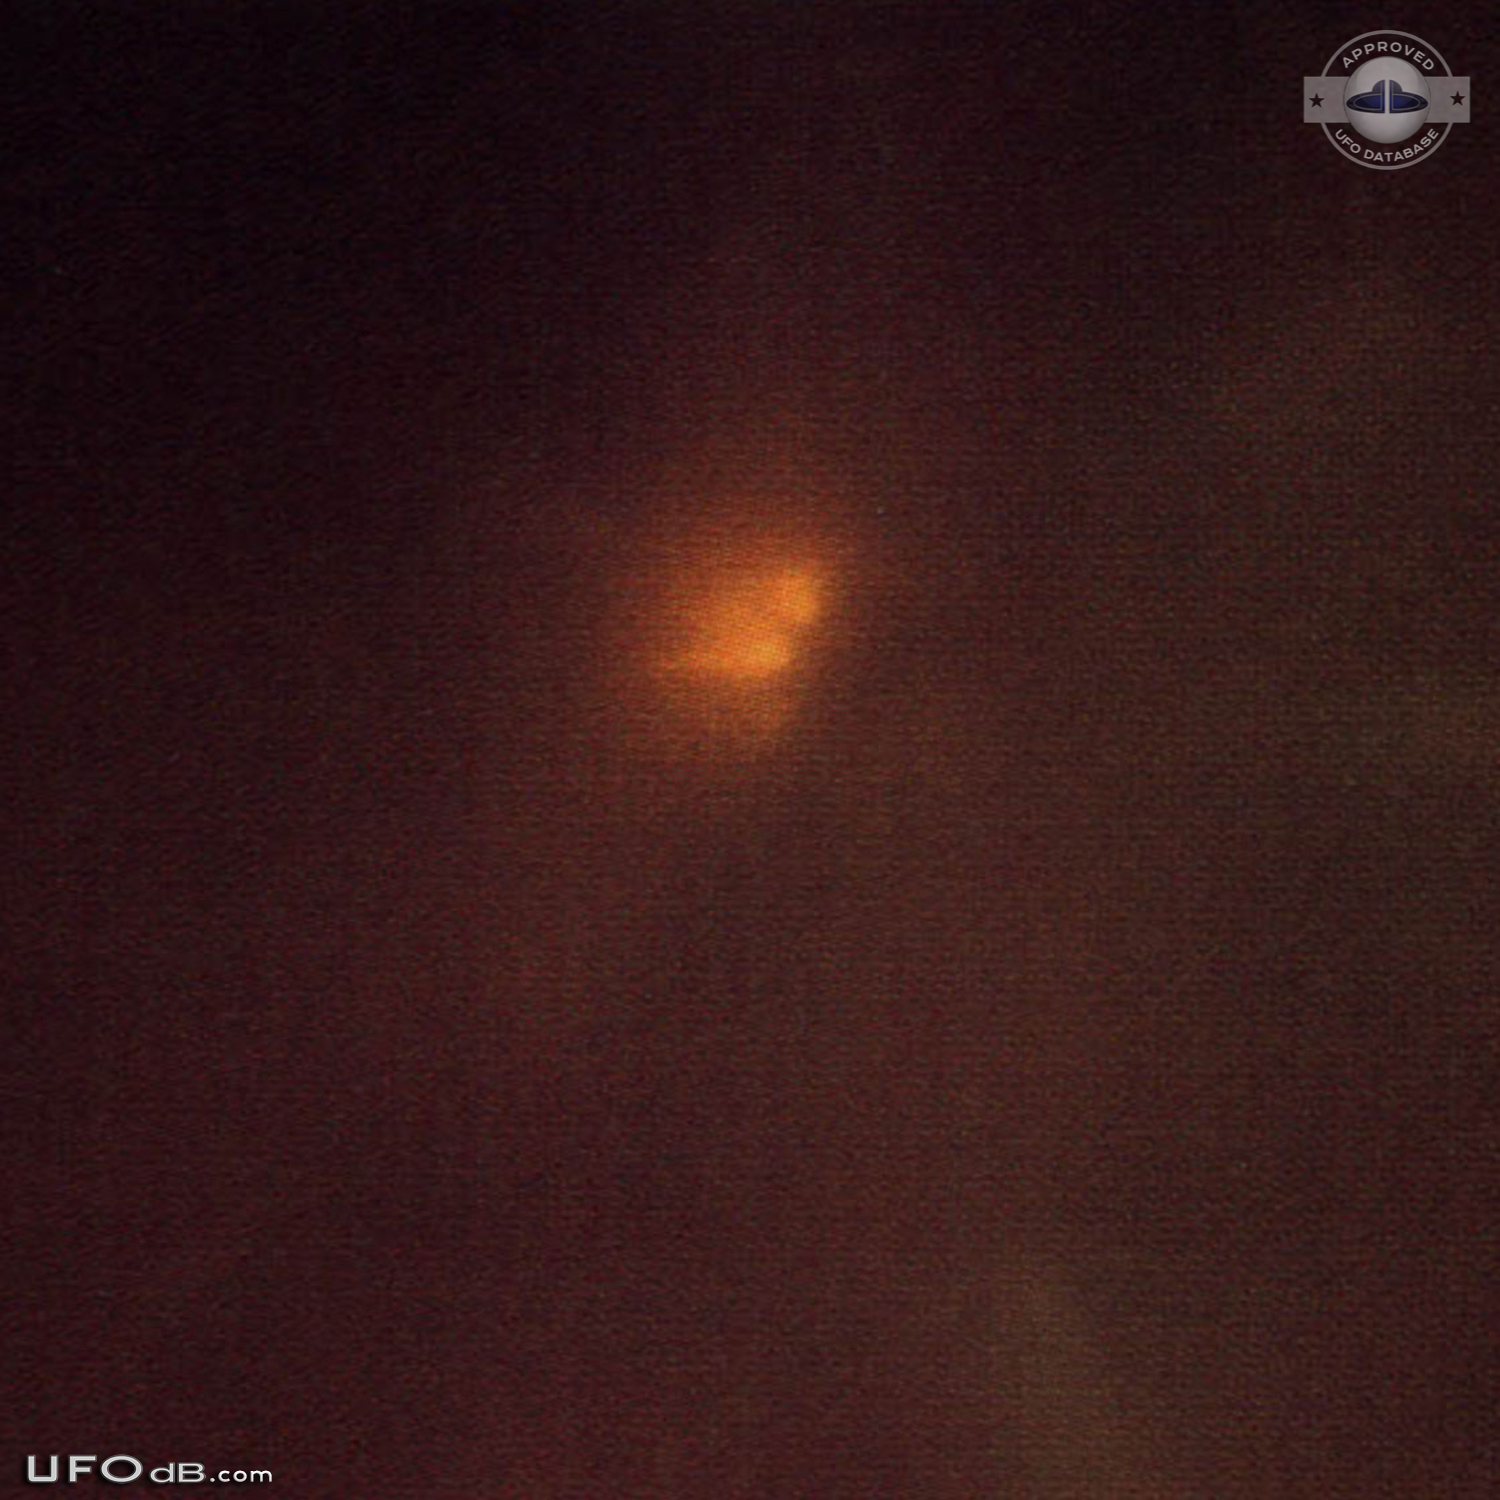 Famous Montreal Canada mass ufo sighting of November 7 1990 UFO Picture #546-1